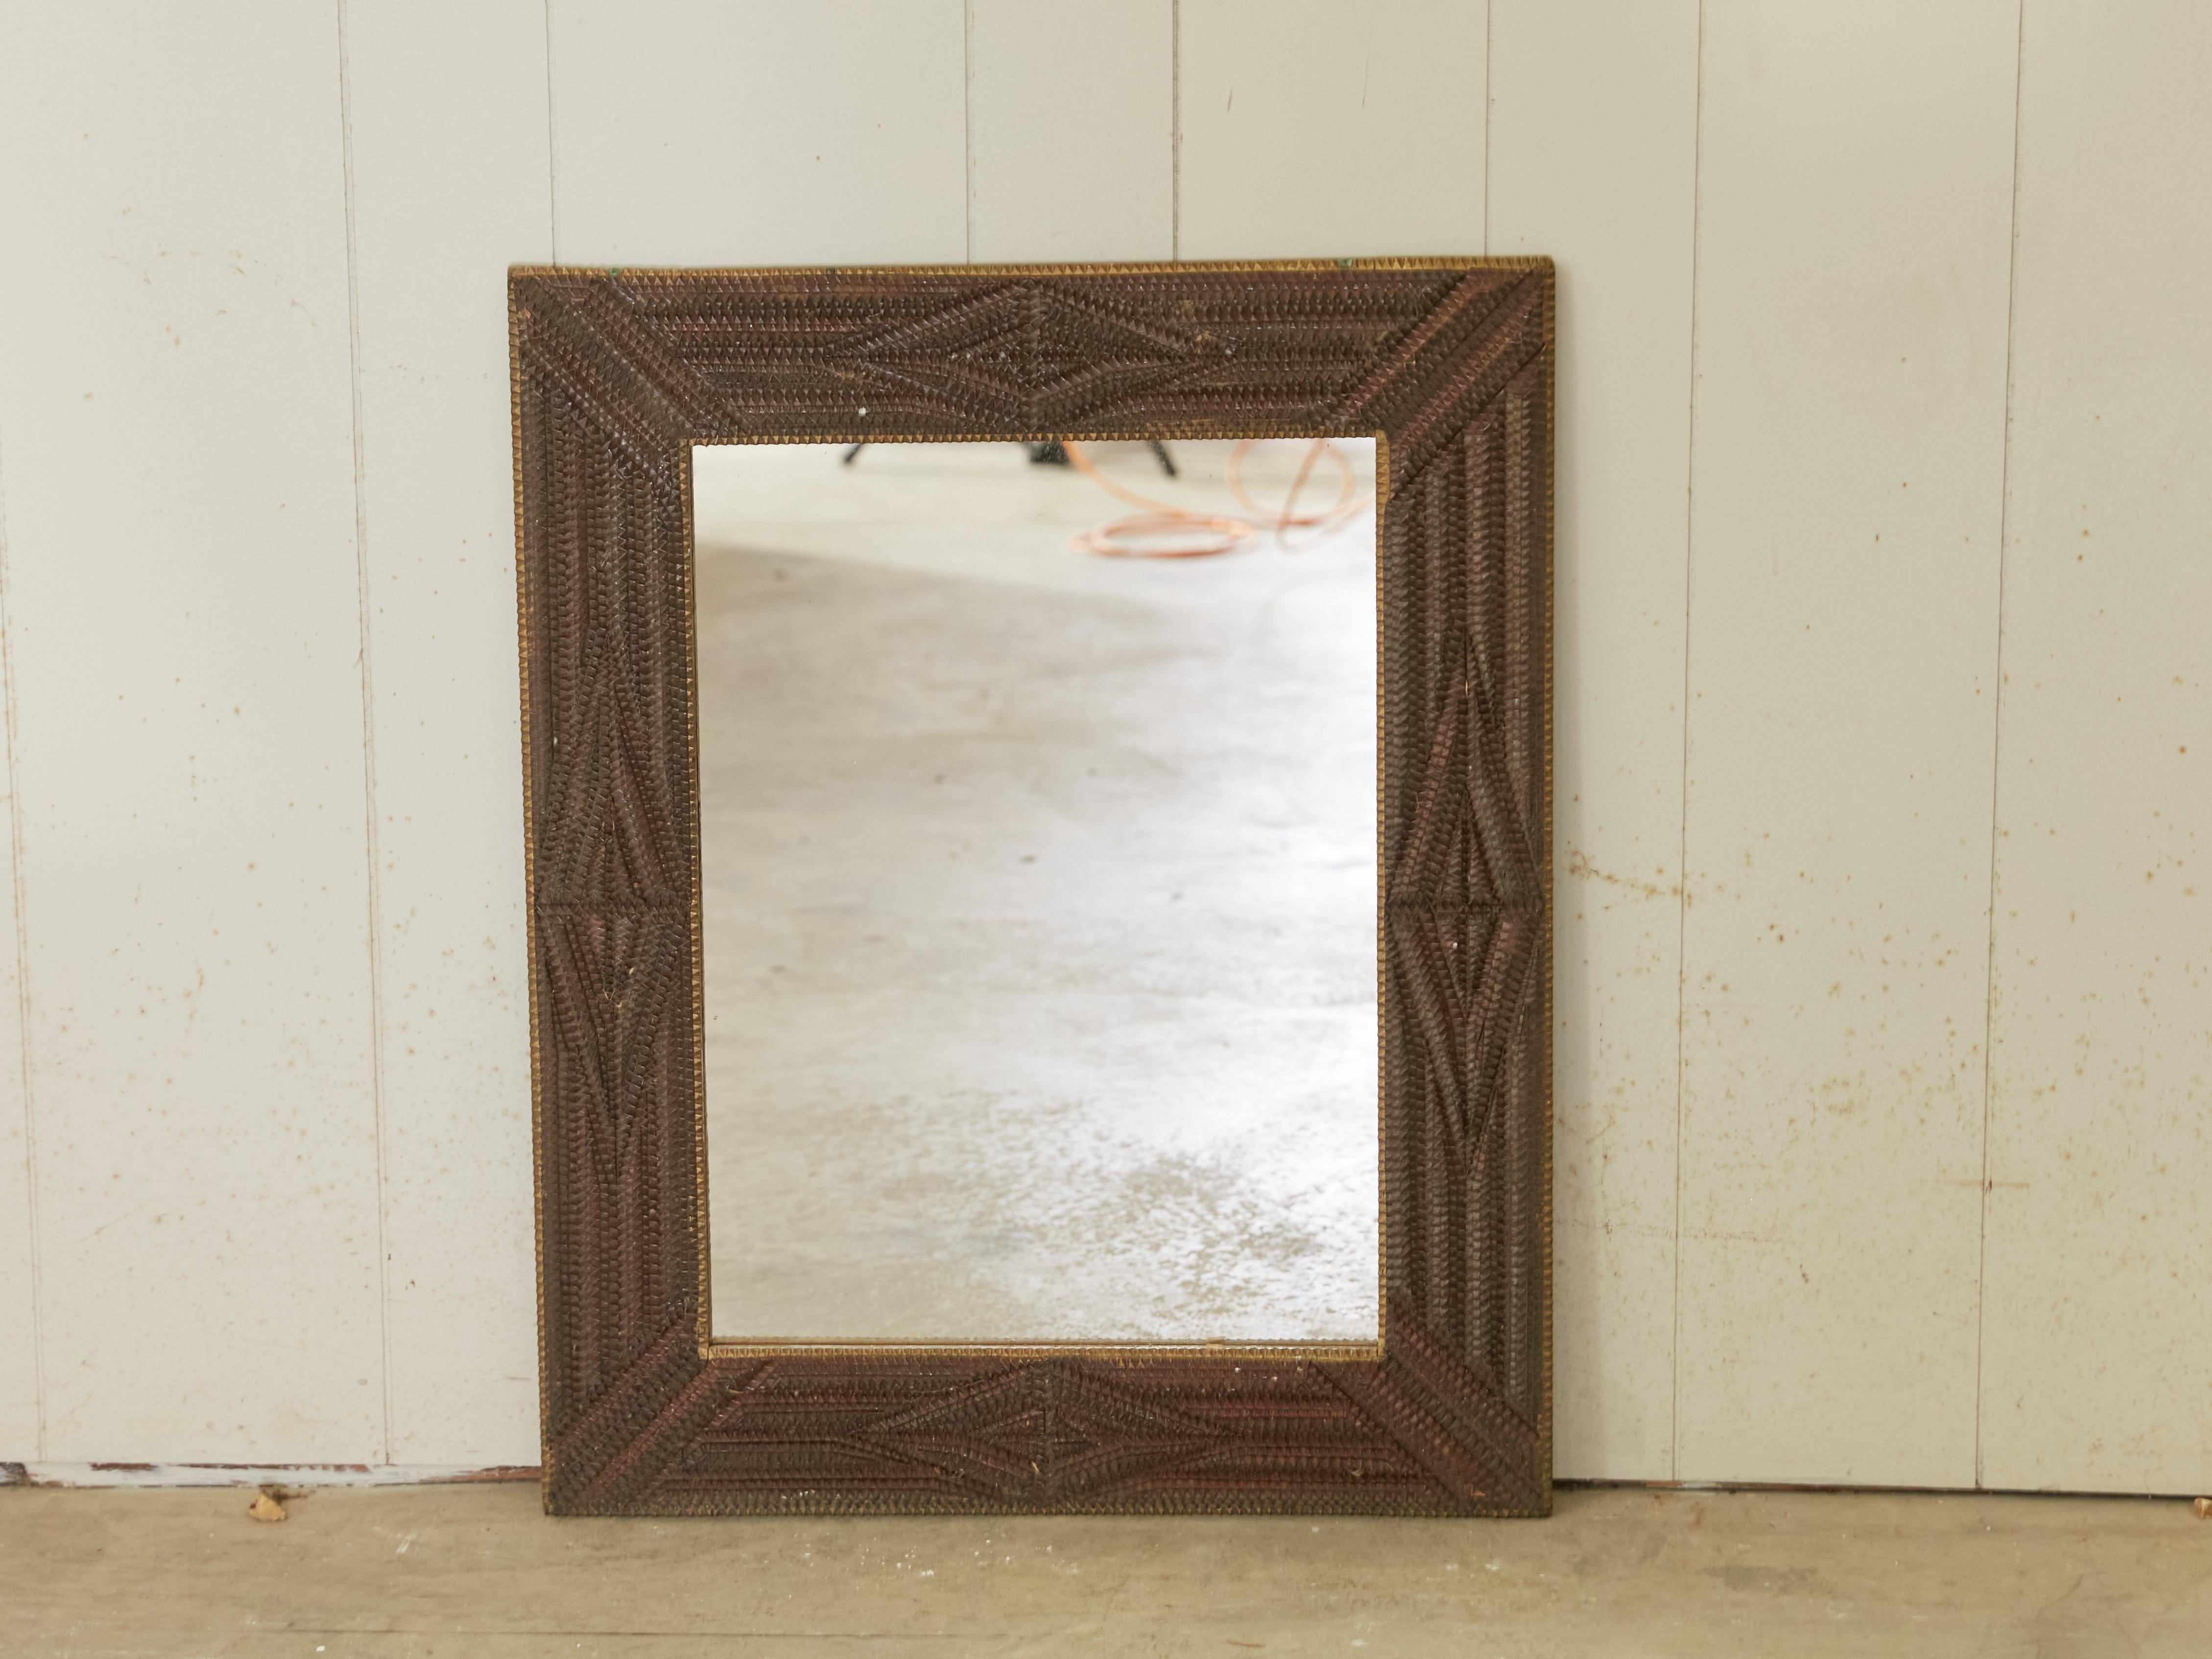 A French rectangular Tramp Art hand-carved wooden mirror from the early 20th century, with raised diamond motifs and geometric patterns. Created in France during the early years of the 20th century, this wall mirror was hand carved in the manner